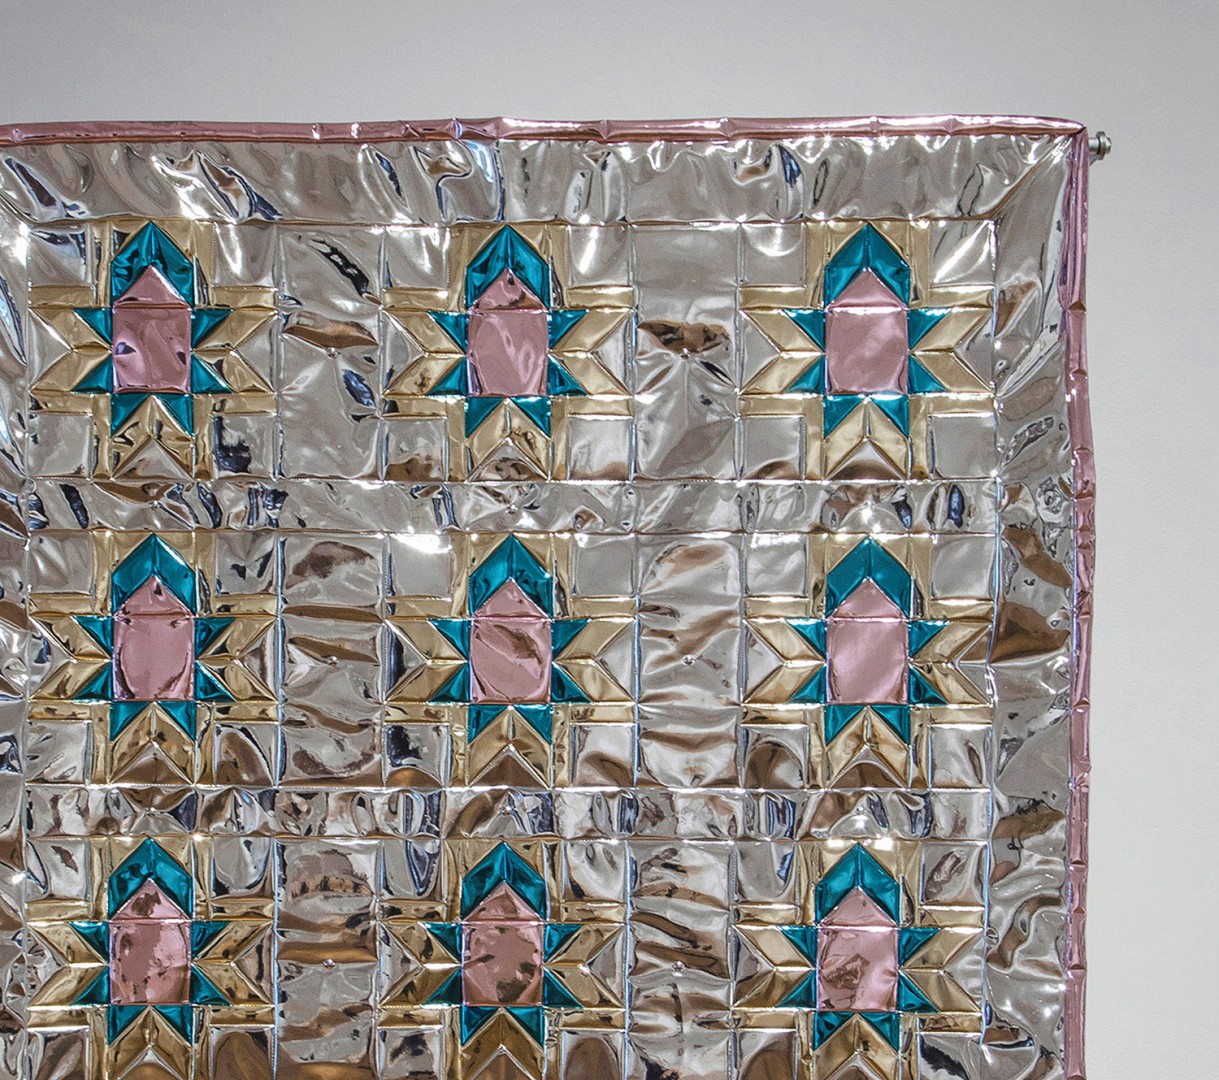 A shiny art installation that has the appearance of a quilt.